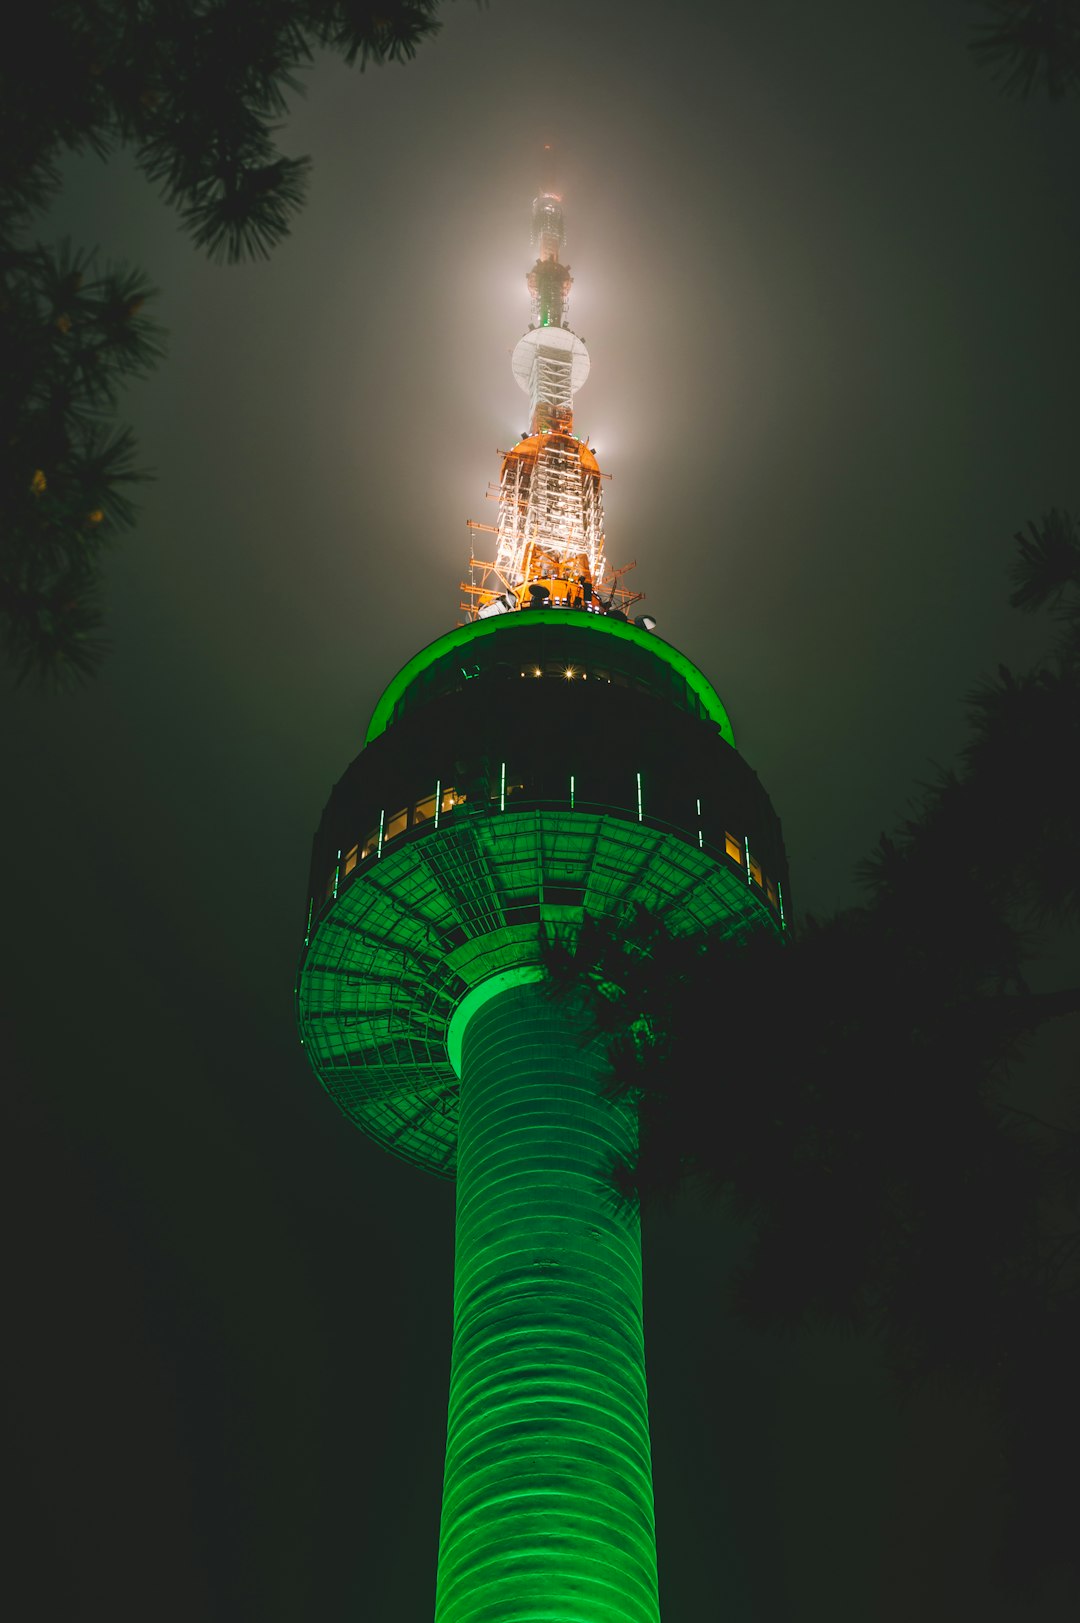 turned on green and white lighted tower during nighttime